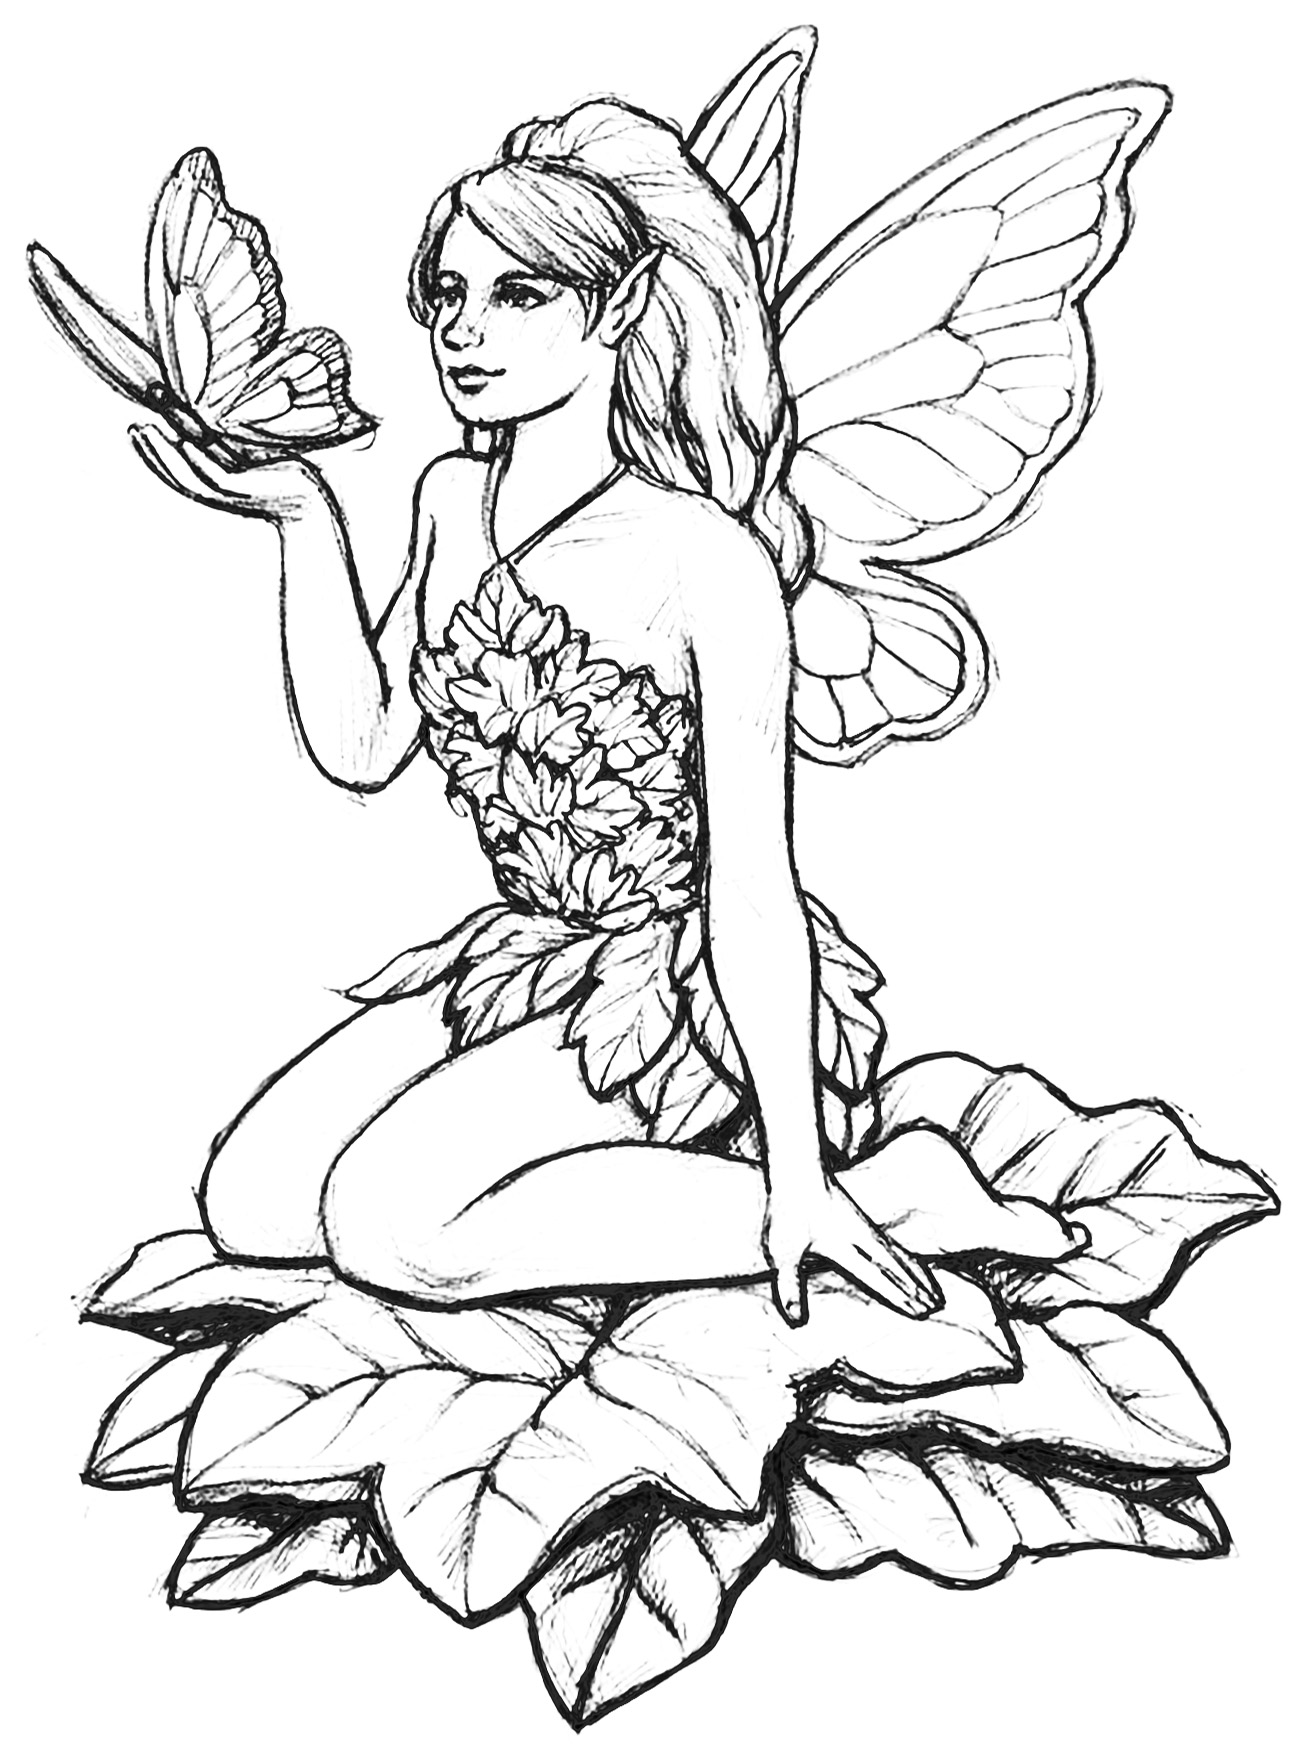 Fairy and butterfly - Myths & legends Adult Coloring Pages